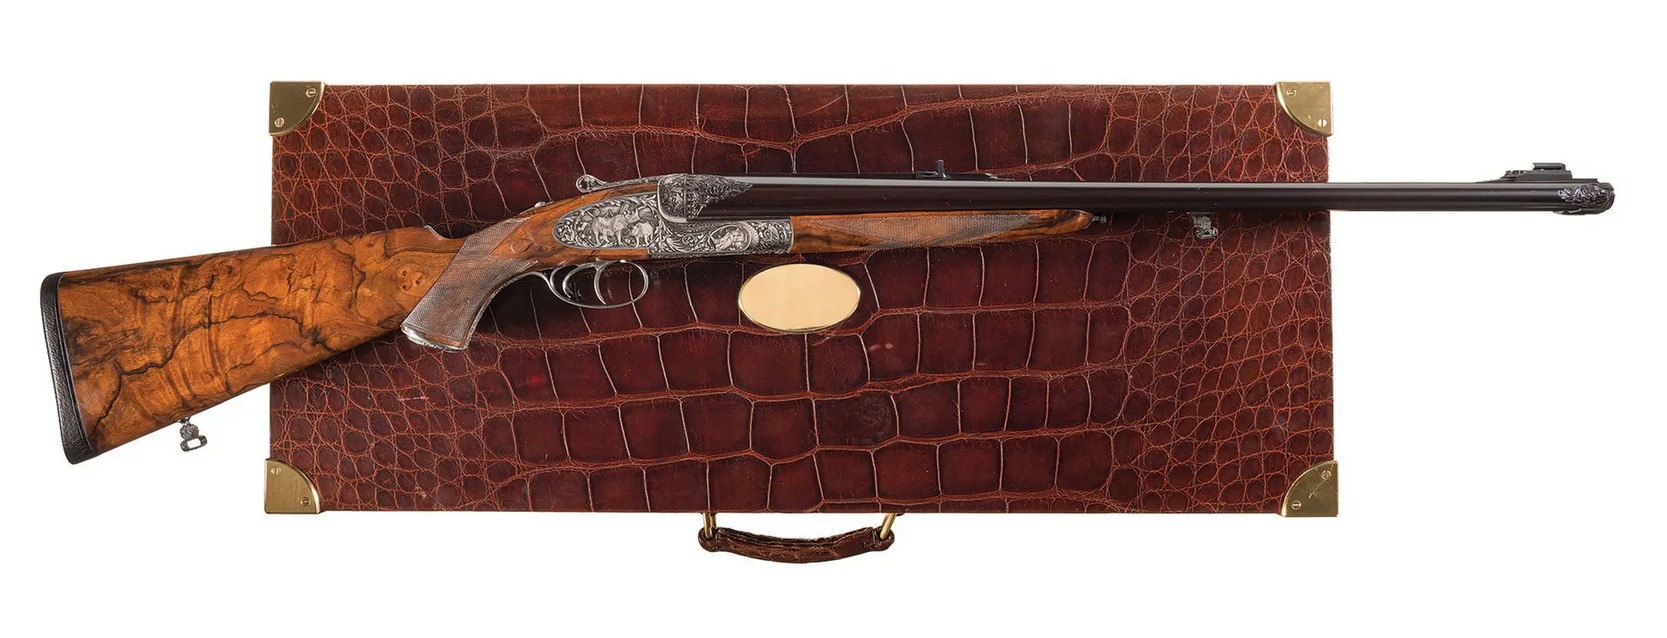 This rifle is coming up for sale by Rock Island Auction at their Premiere A...